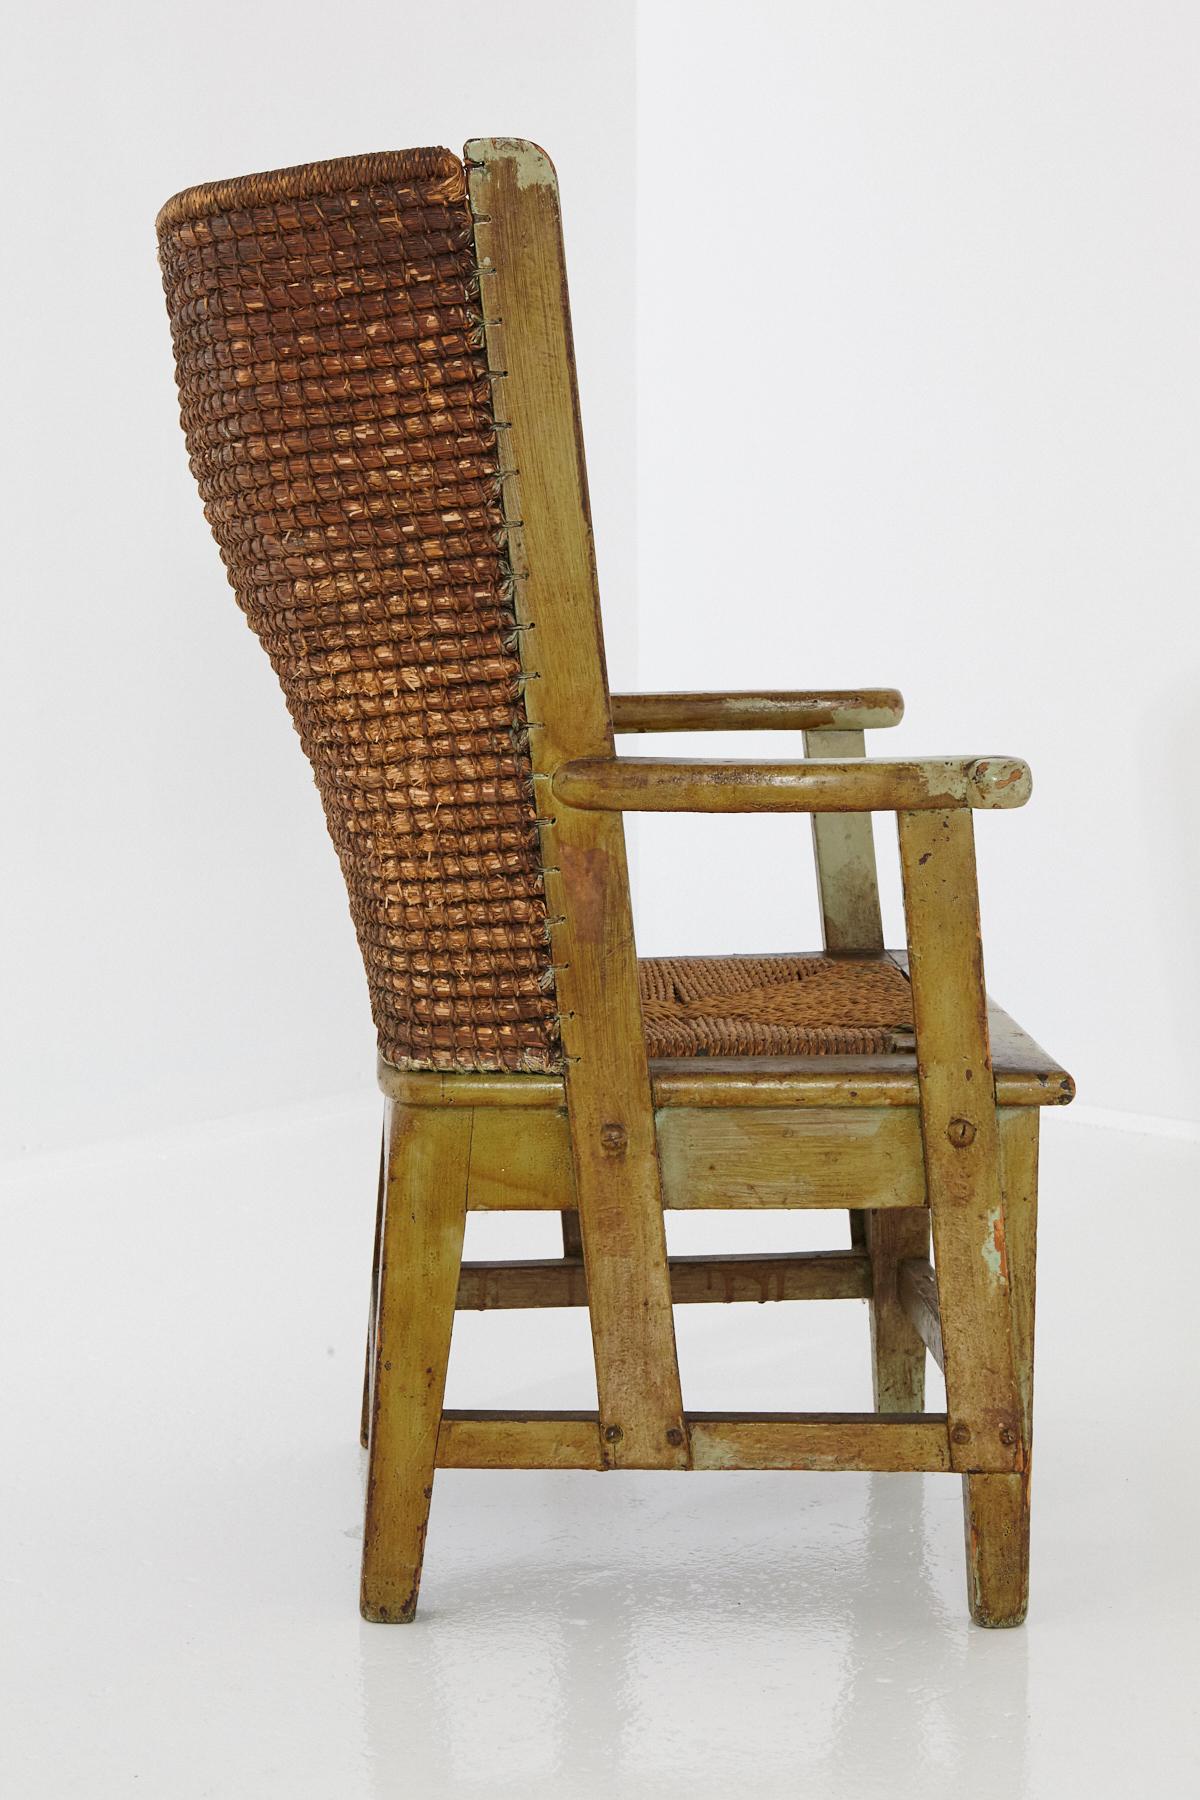 Child's Orkney Chair with Hand Woven Straw Back, Scotland, 19th Century For Sale 3